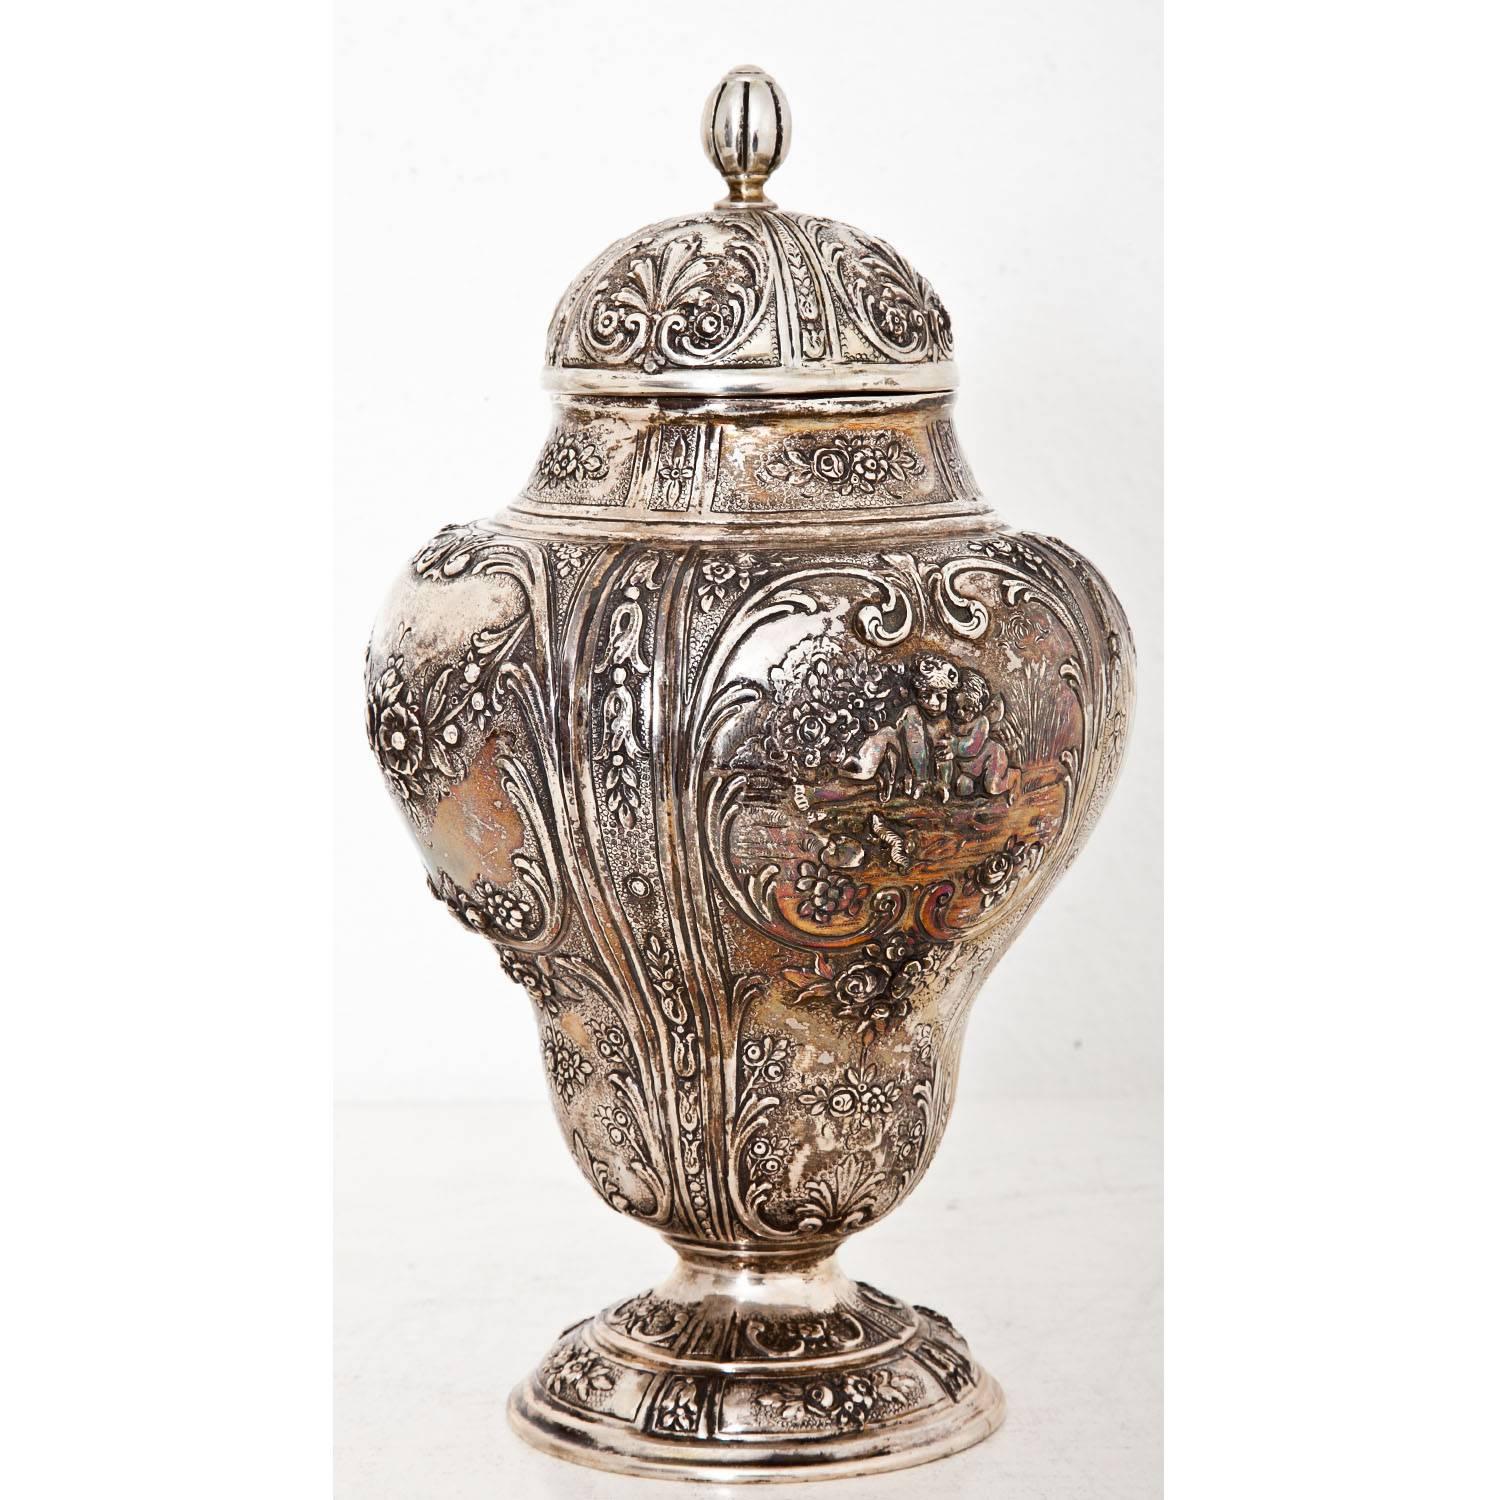 Silver lidded vase on a round stand with a bellied body. The wall is decorated with roses and leaves and shows cupids in cartouches. The urn is stamped at the bottom for Germany, silver 800 and maker’s mark OS.